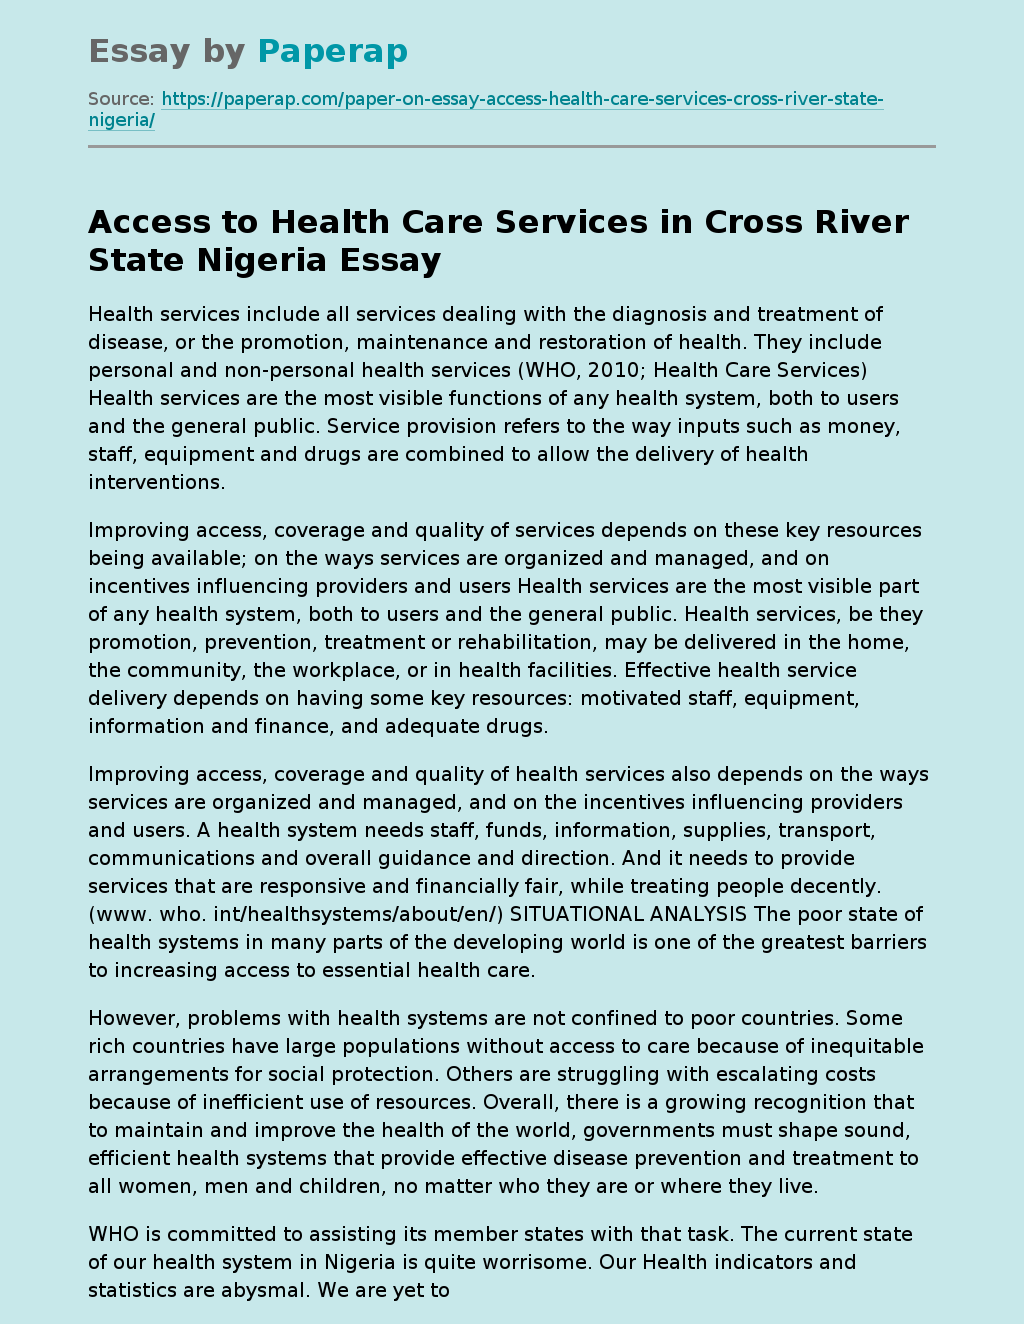 Access to Health Care Services in Cross River State Nigeria